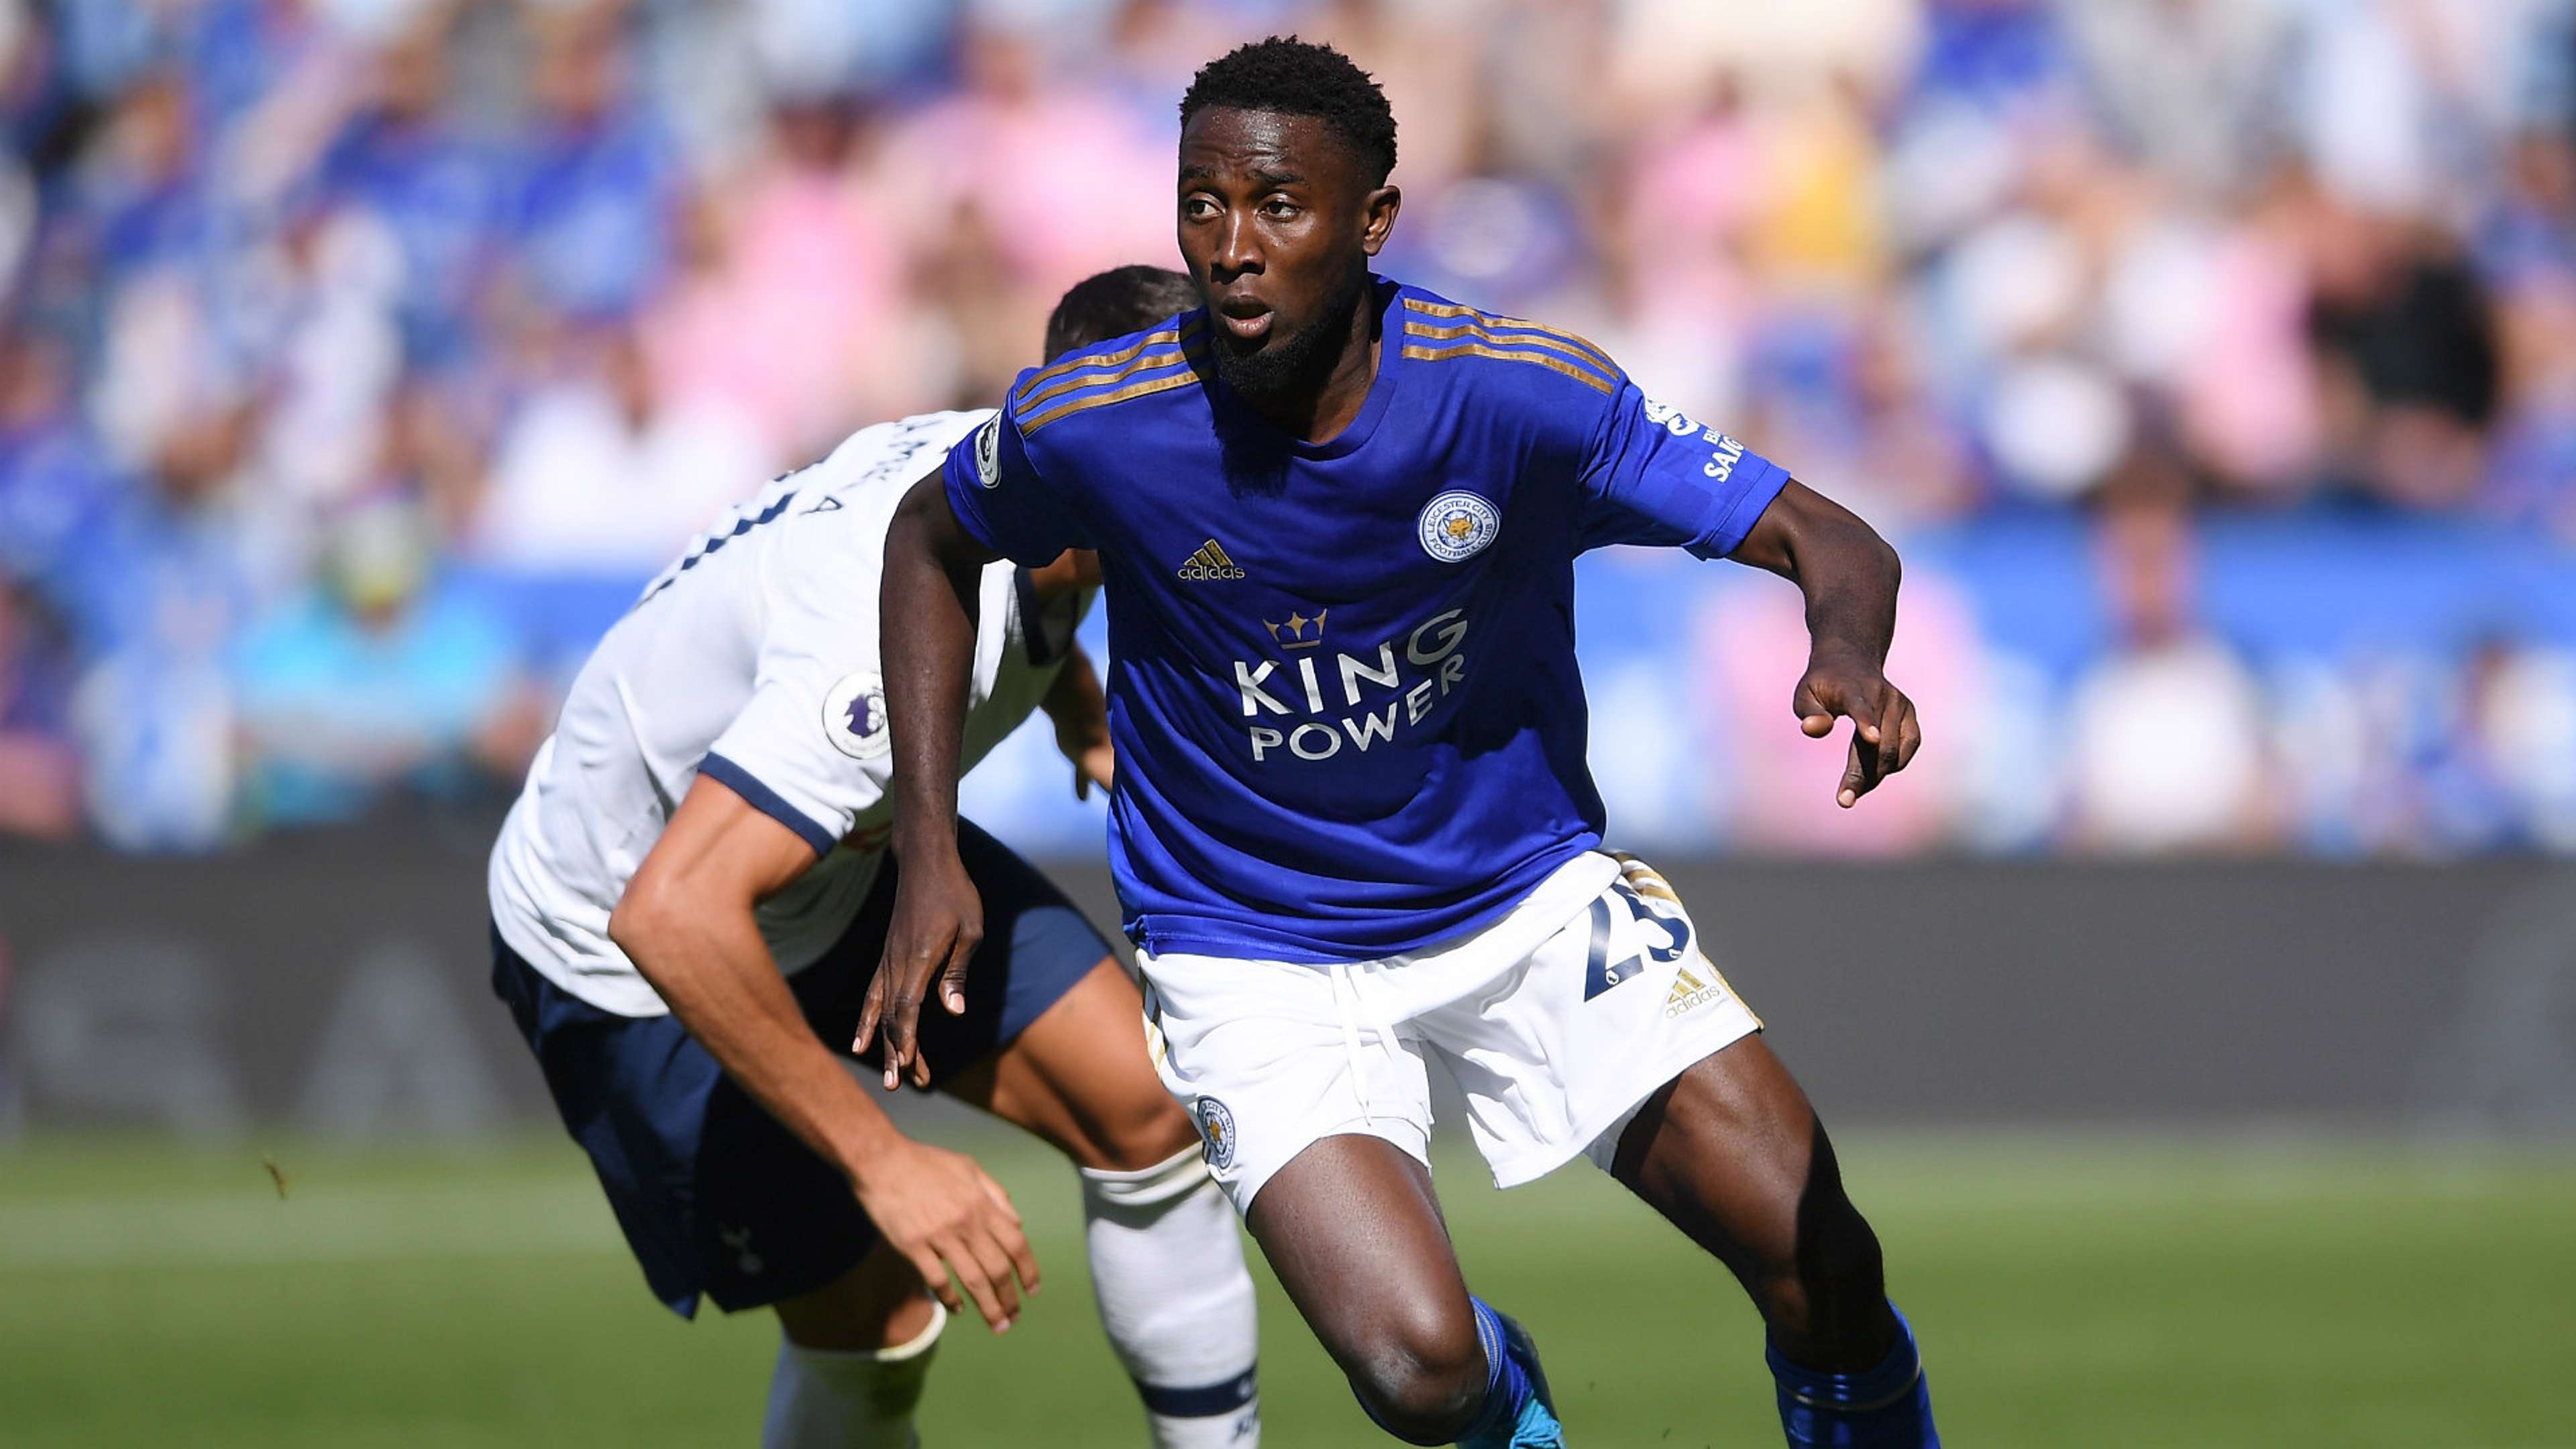 Leicester City's Wilfried Ndidi against Tottenham Hotspur 2019-20